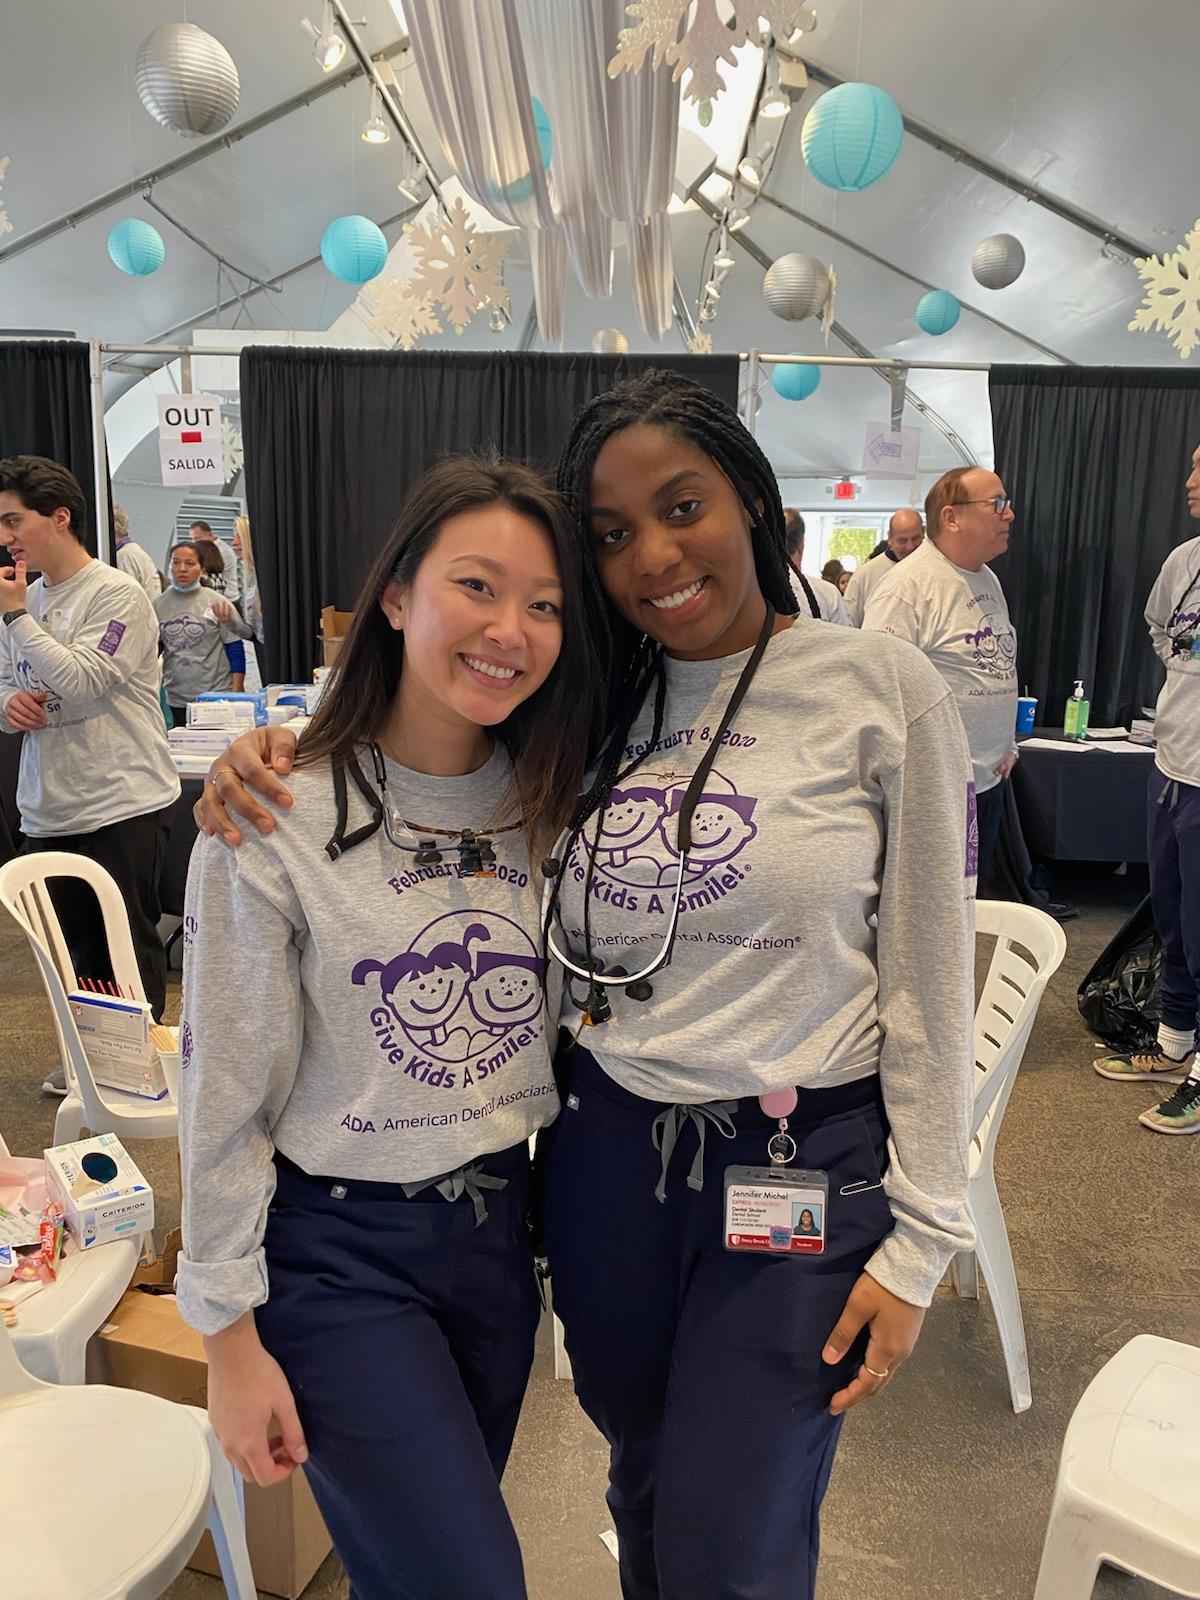 Stony Brook School of Dental Medicine students Tiffany Chung and Jennifer Michel at Suffolk County Dental Society's Give Kids A Smile event. 